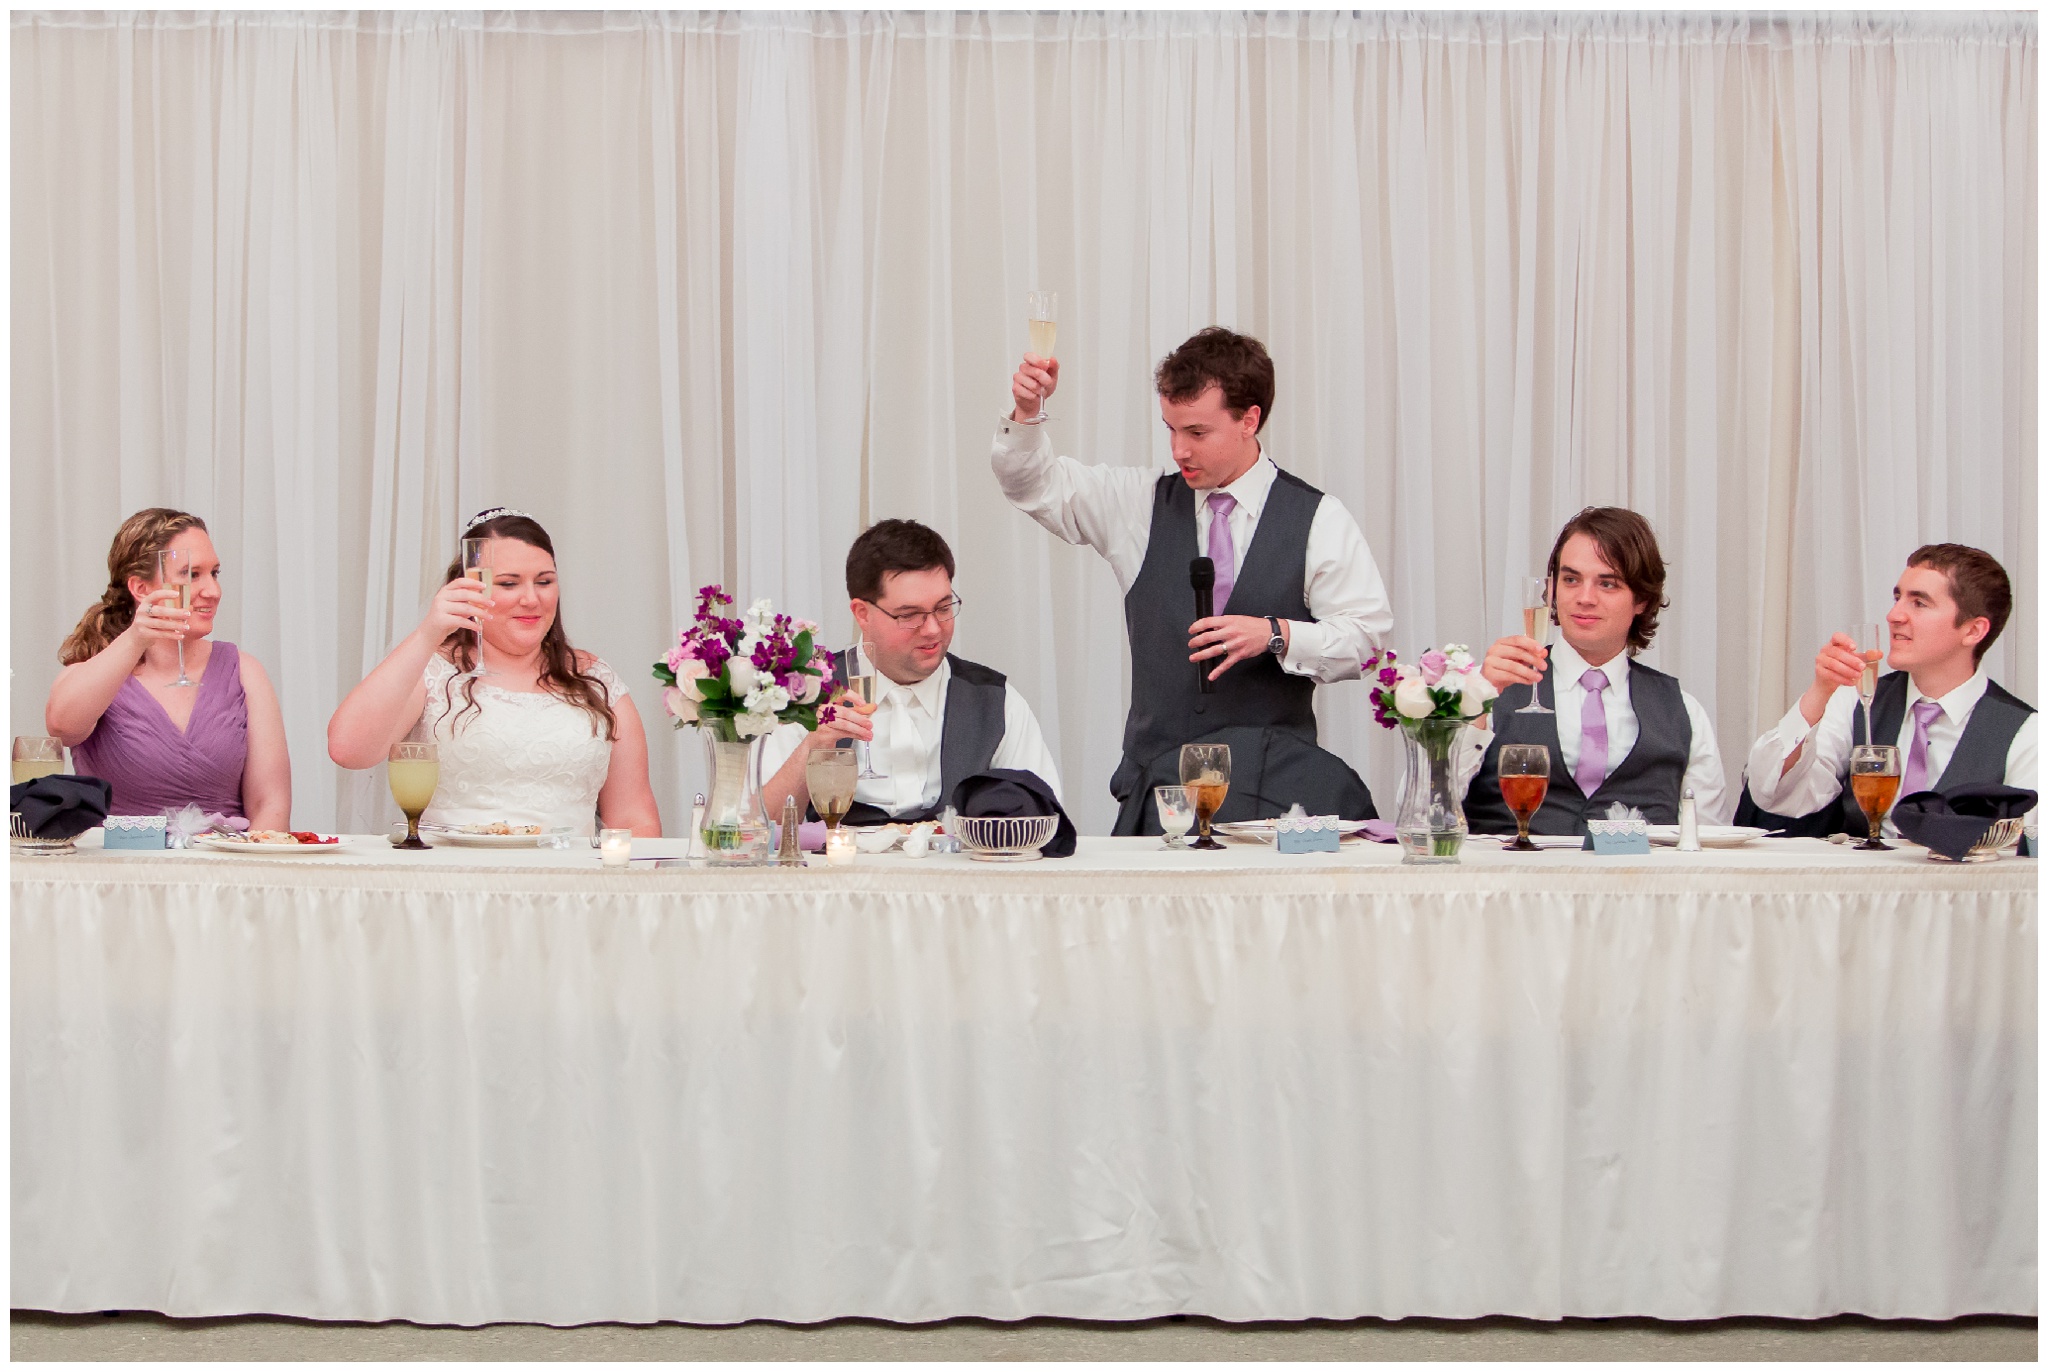 best man gives toast during wedding reception at Bel Air Events in Kokomo Indiana